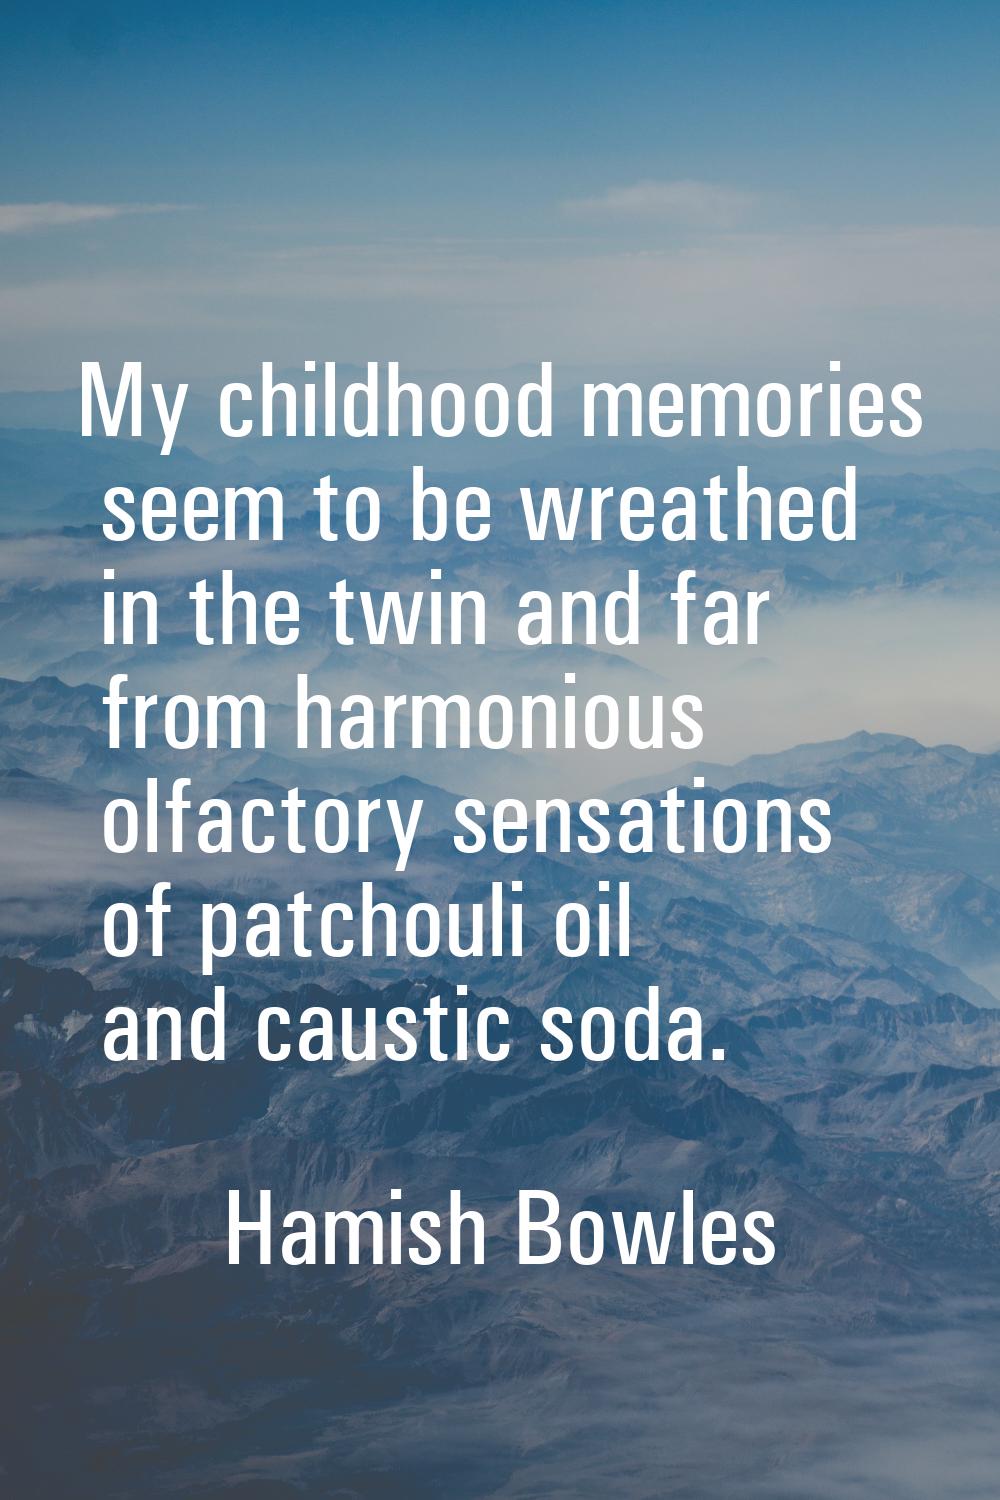 My childhood memories seem to be wreathed in the twin and far from harmonious olfactory sensations 